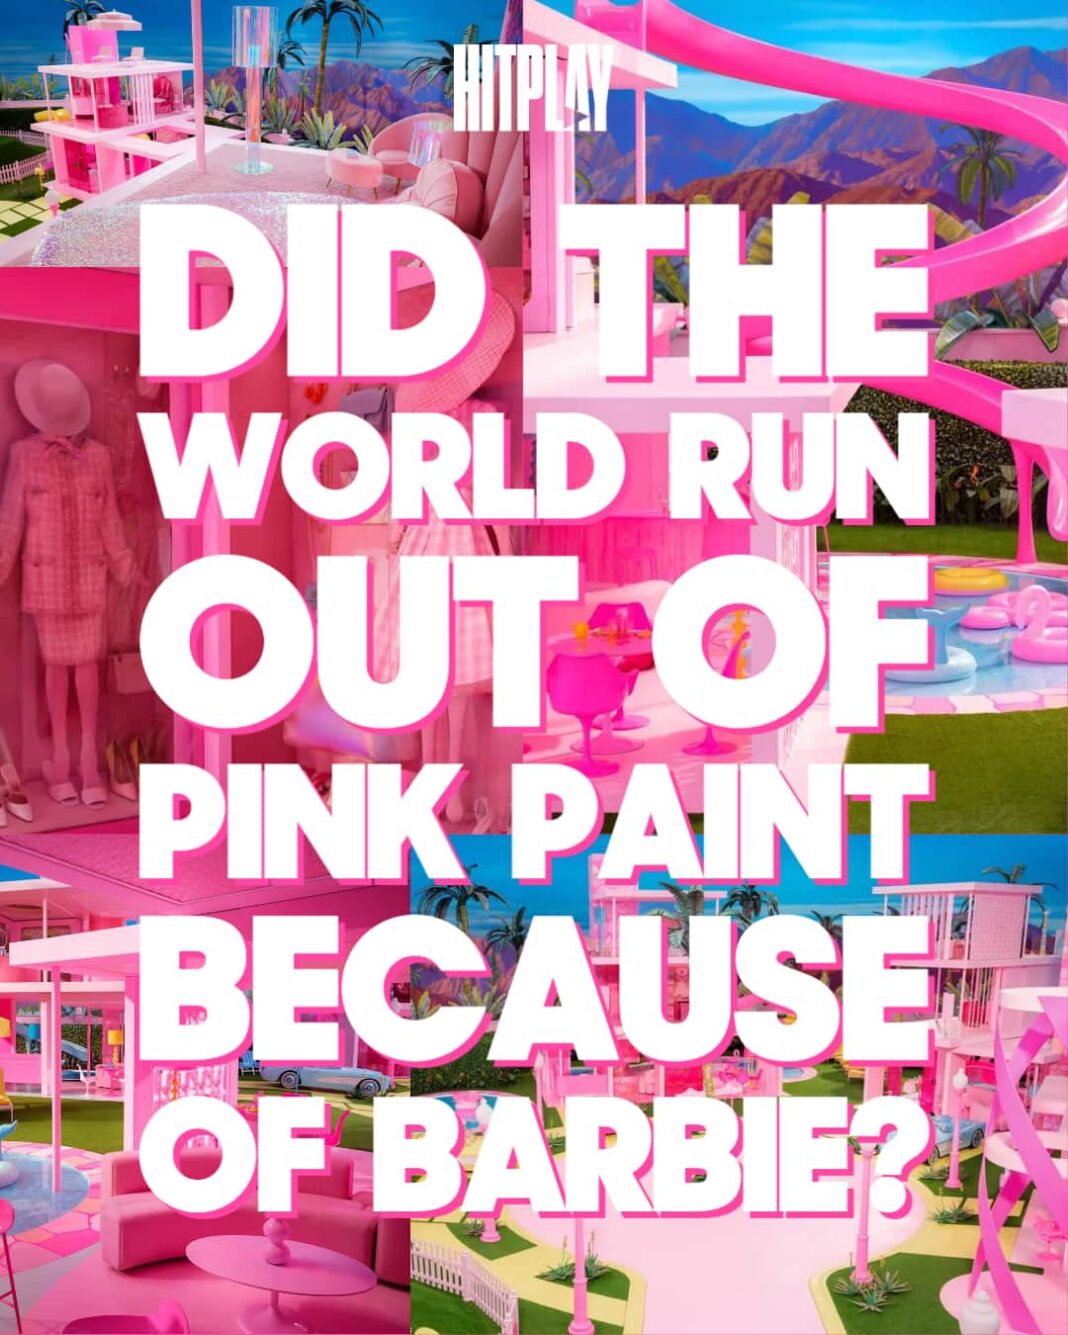 barbie made the world run out of pink paint